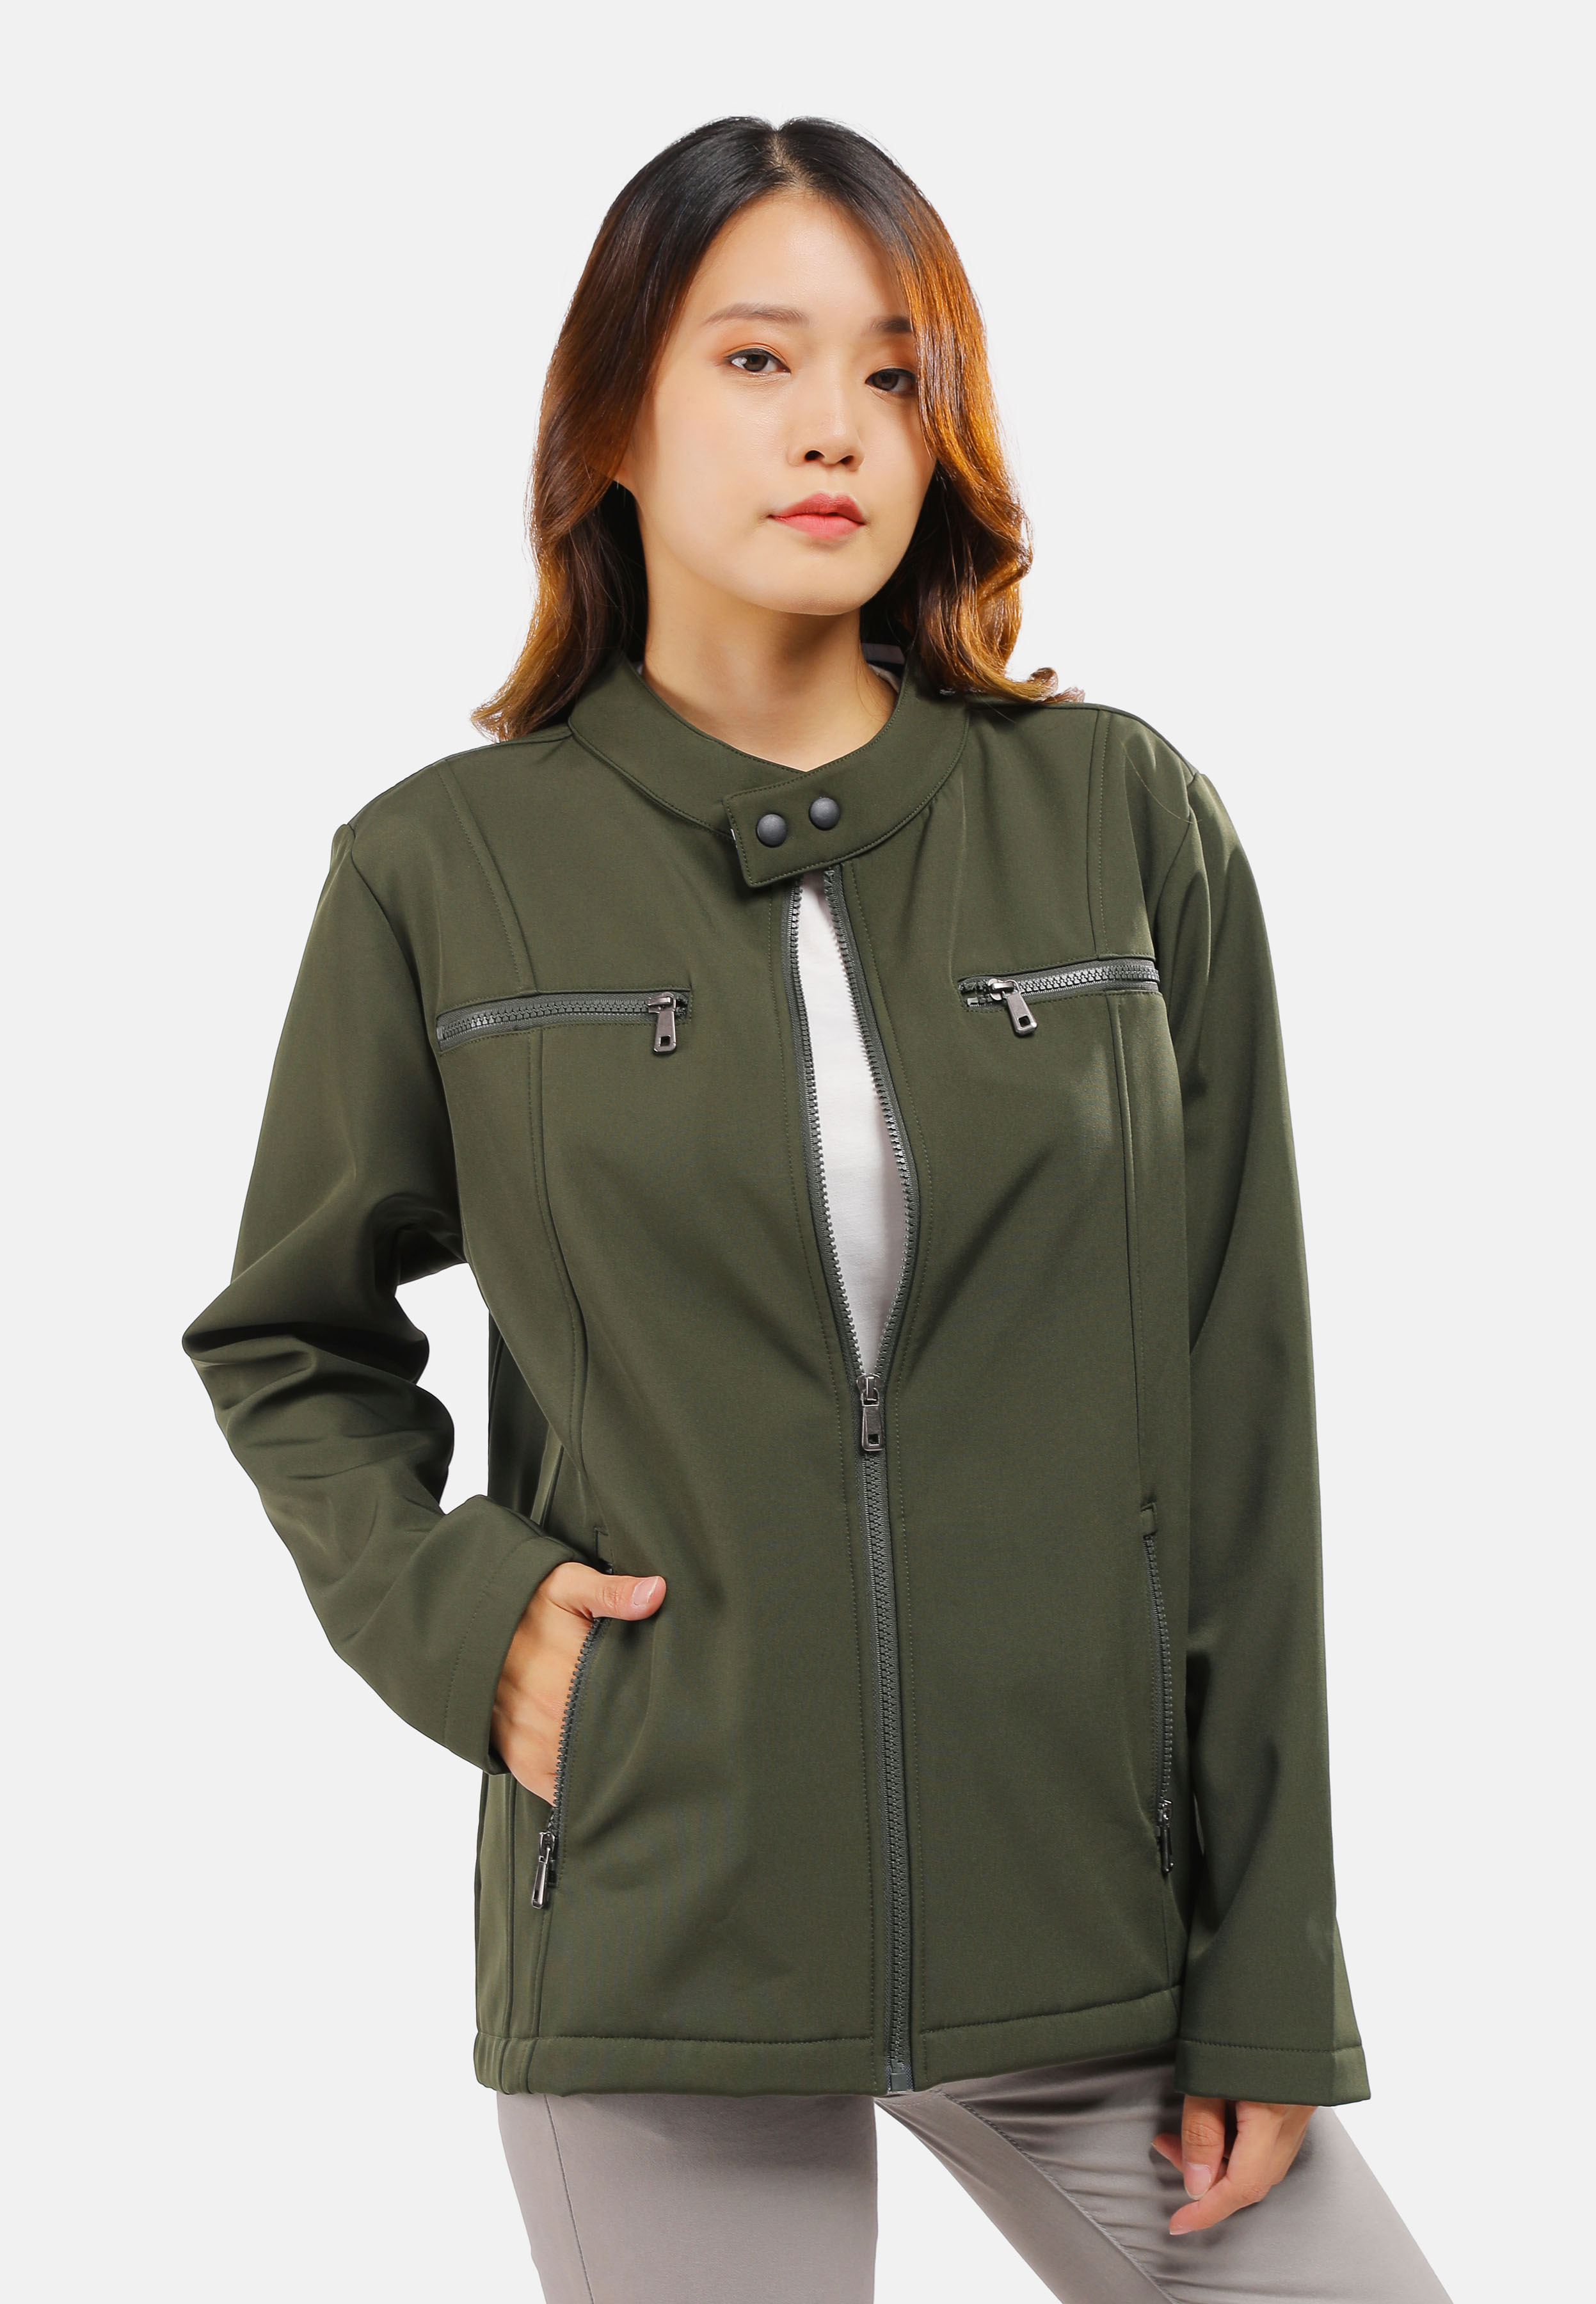 High Neck Jacket 95% Polyester, 5% Spandex- Army Green (P-304-28 ...